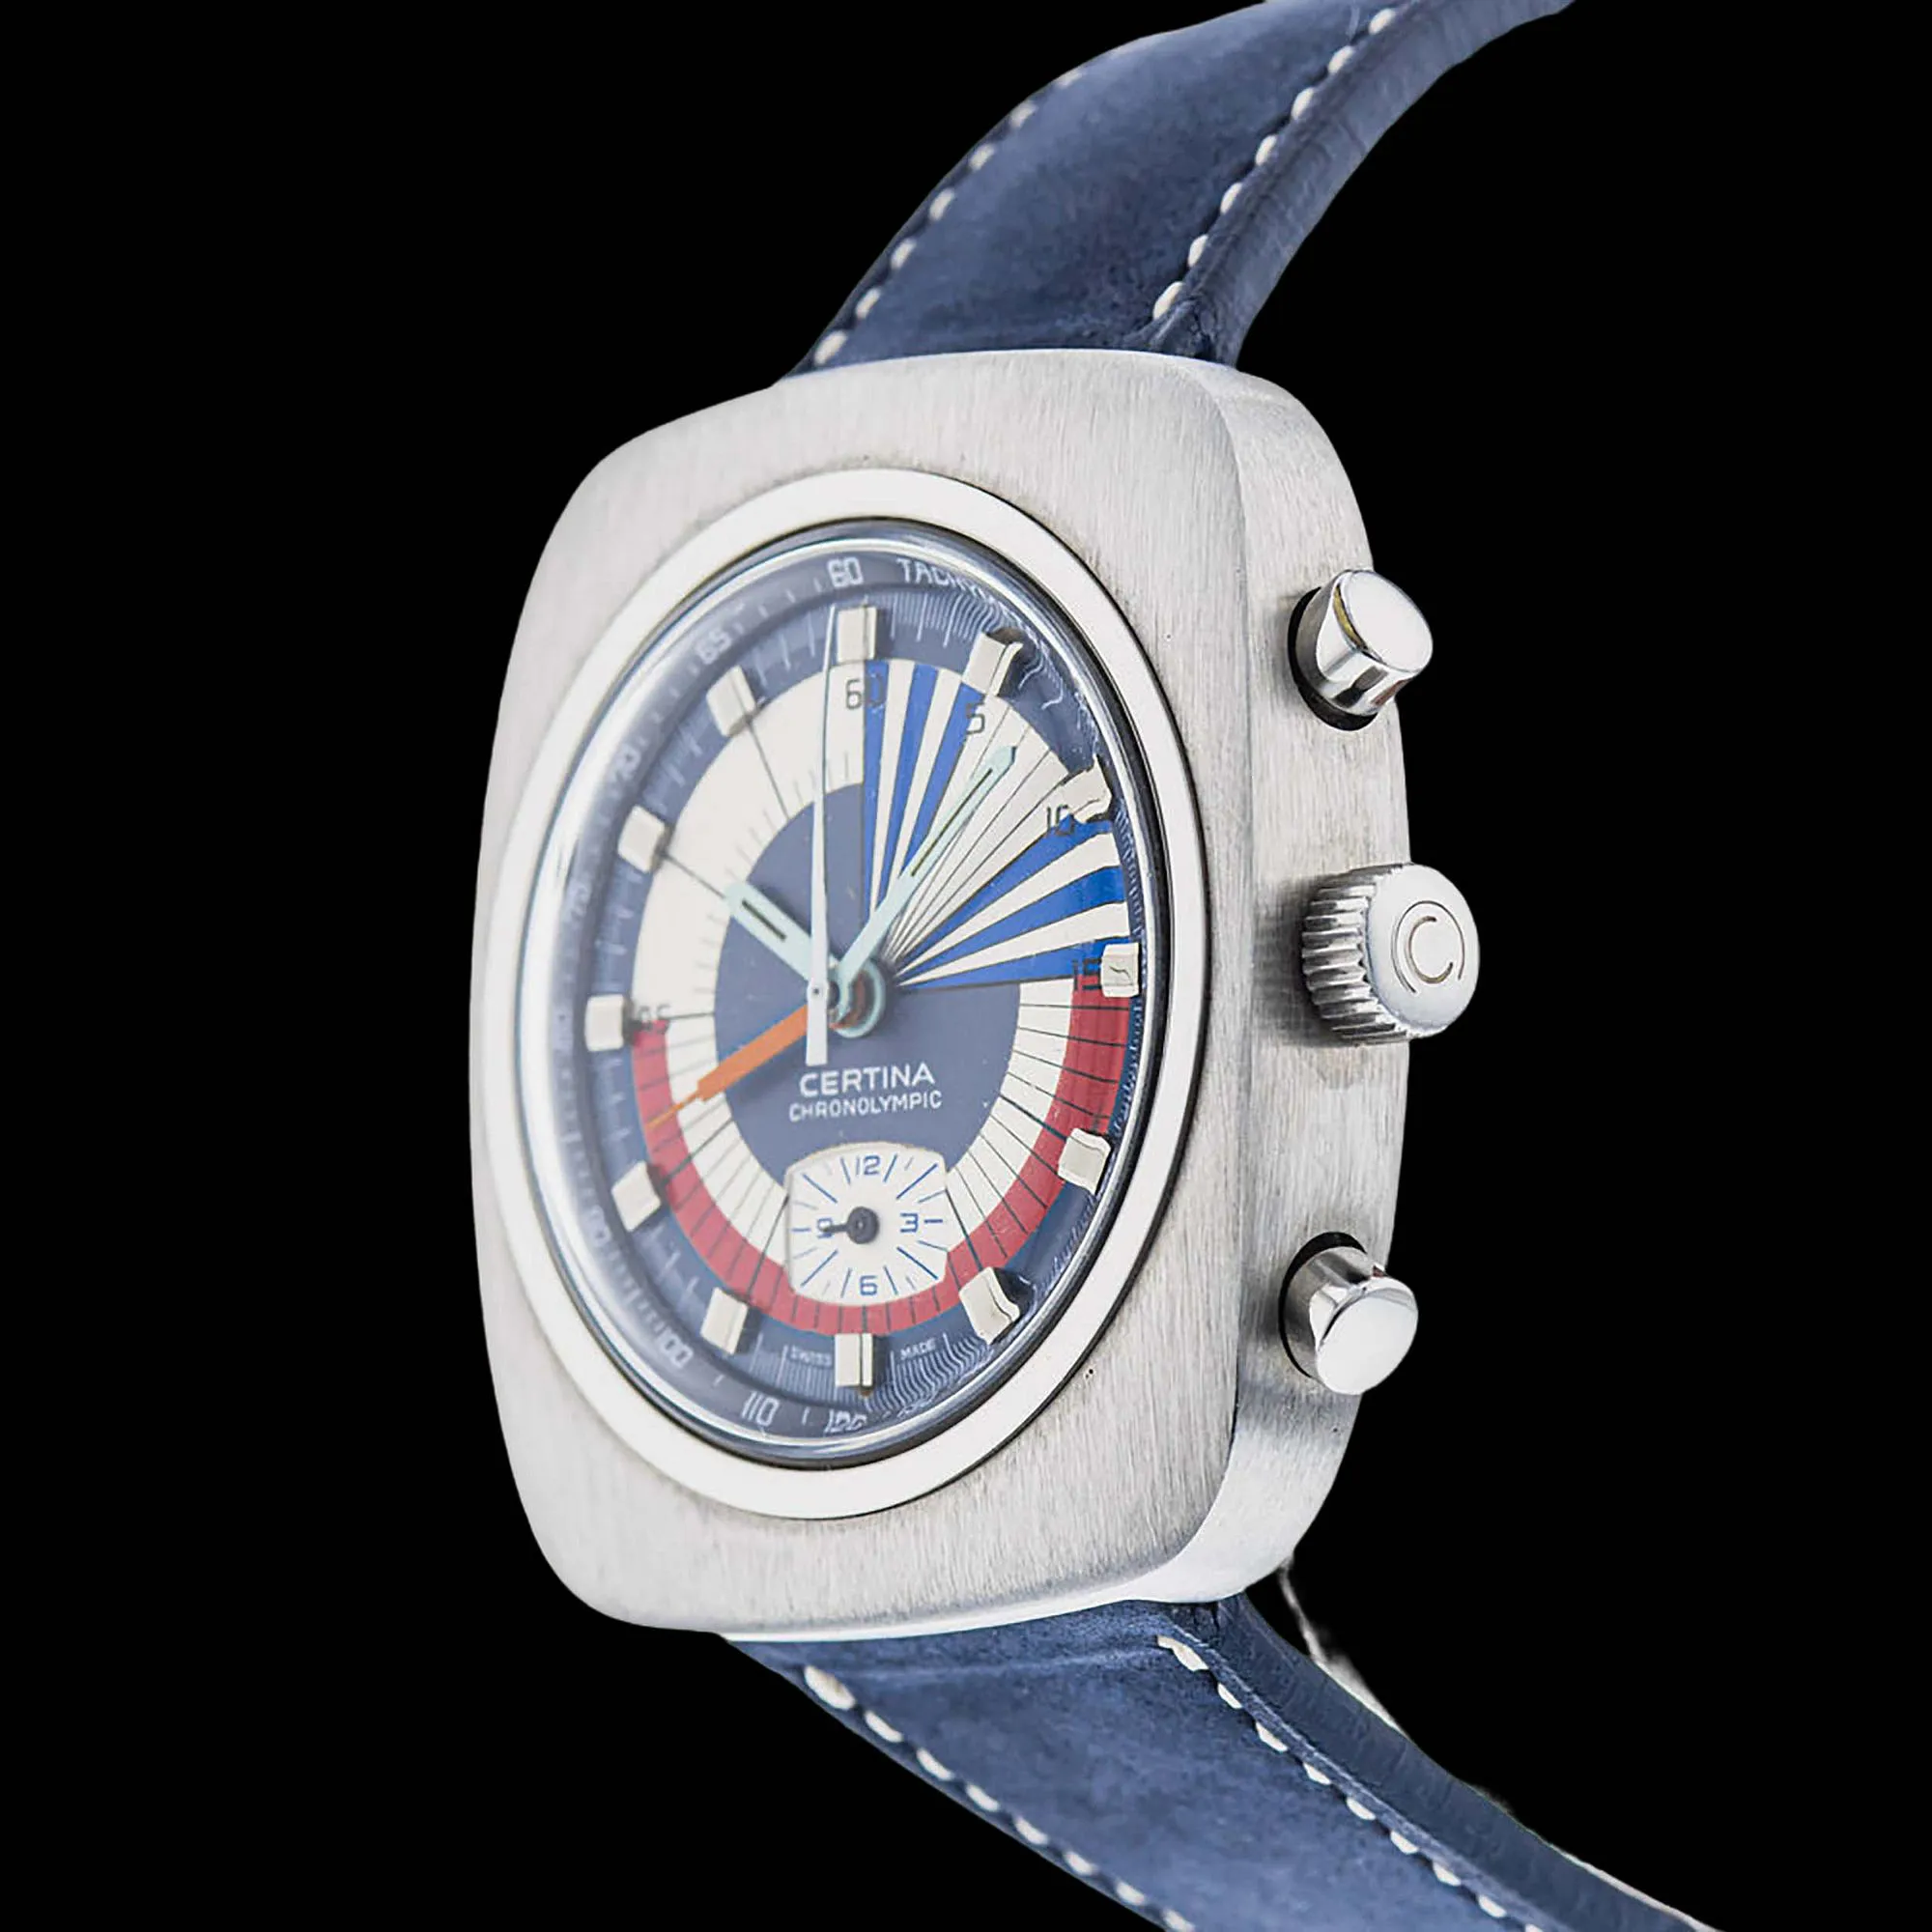 Certina Chronolympic 39mm Stainless steel Blue 1